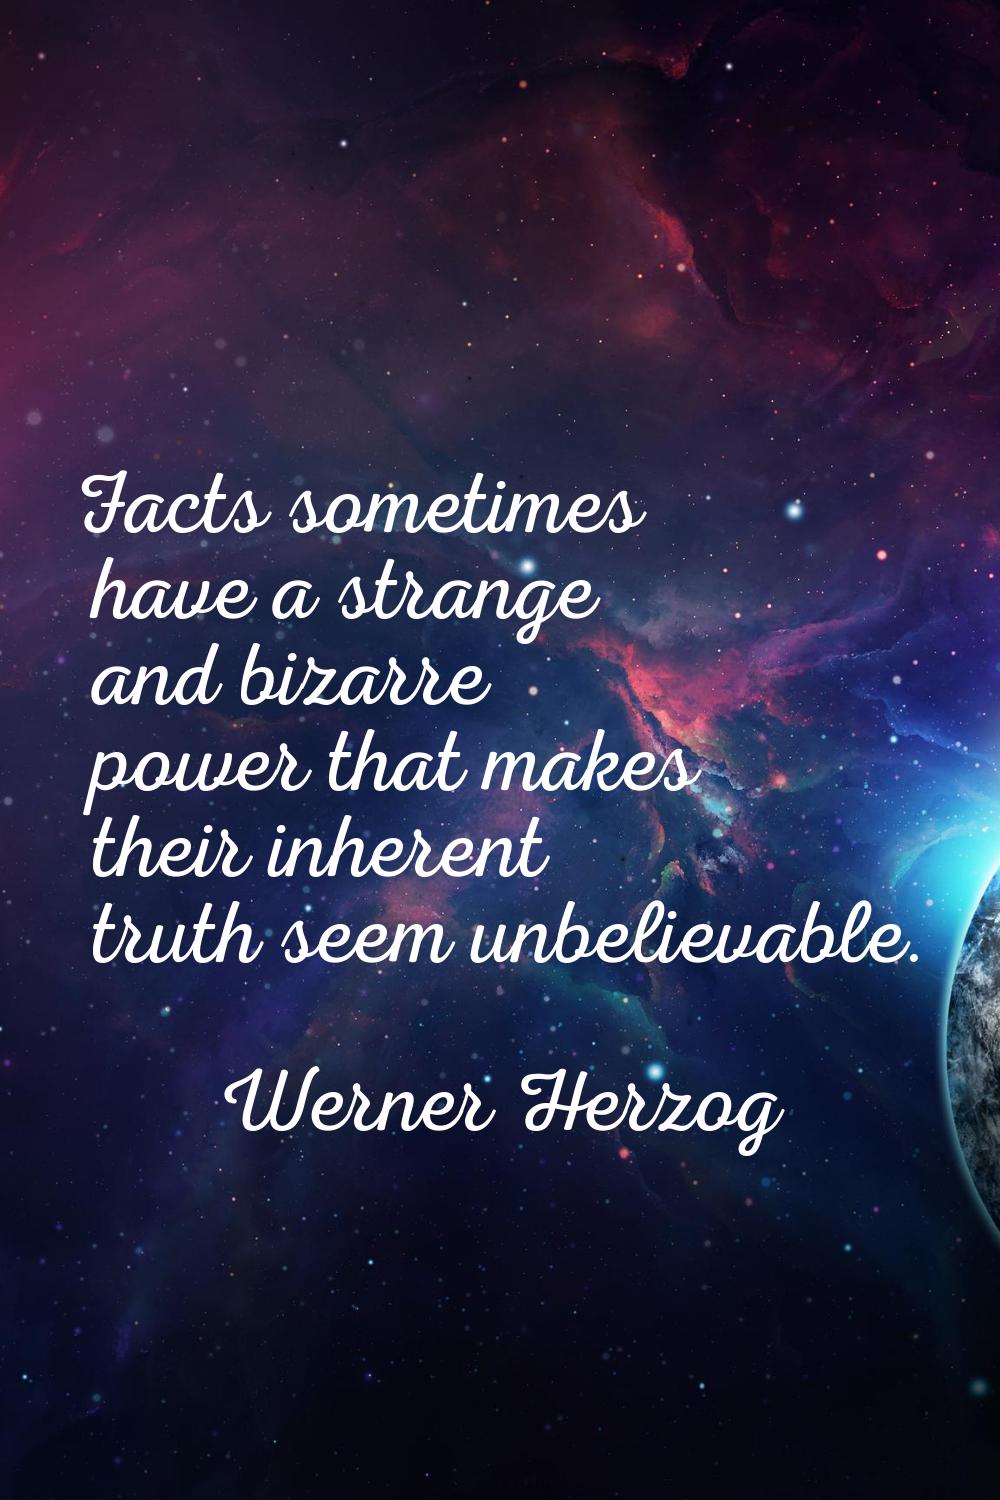 Facts sometimes have a strange and bizarre power that makes their inherent truth seem unbelievable.